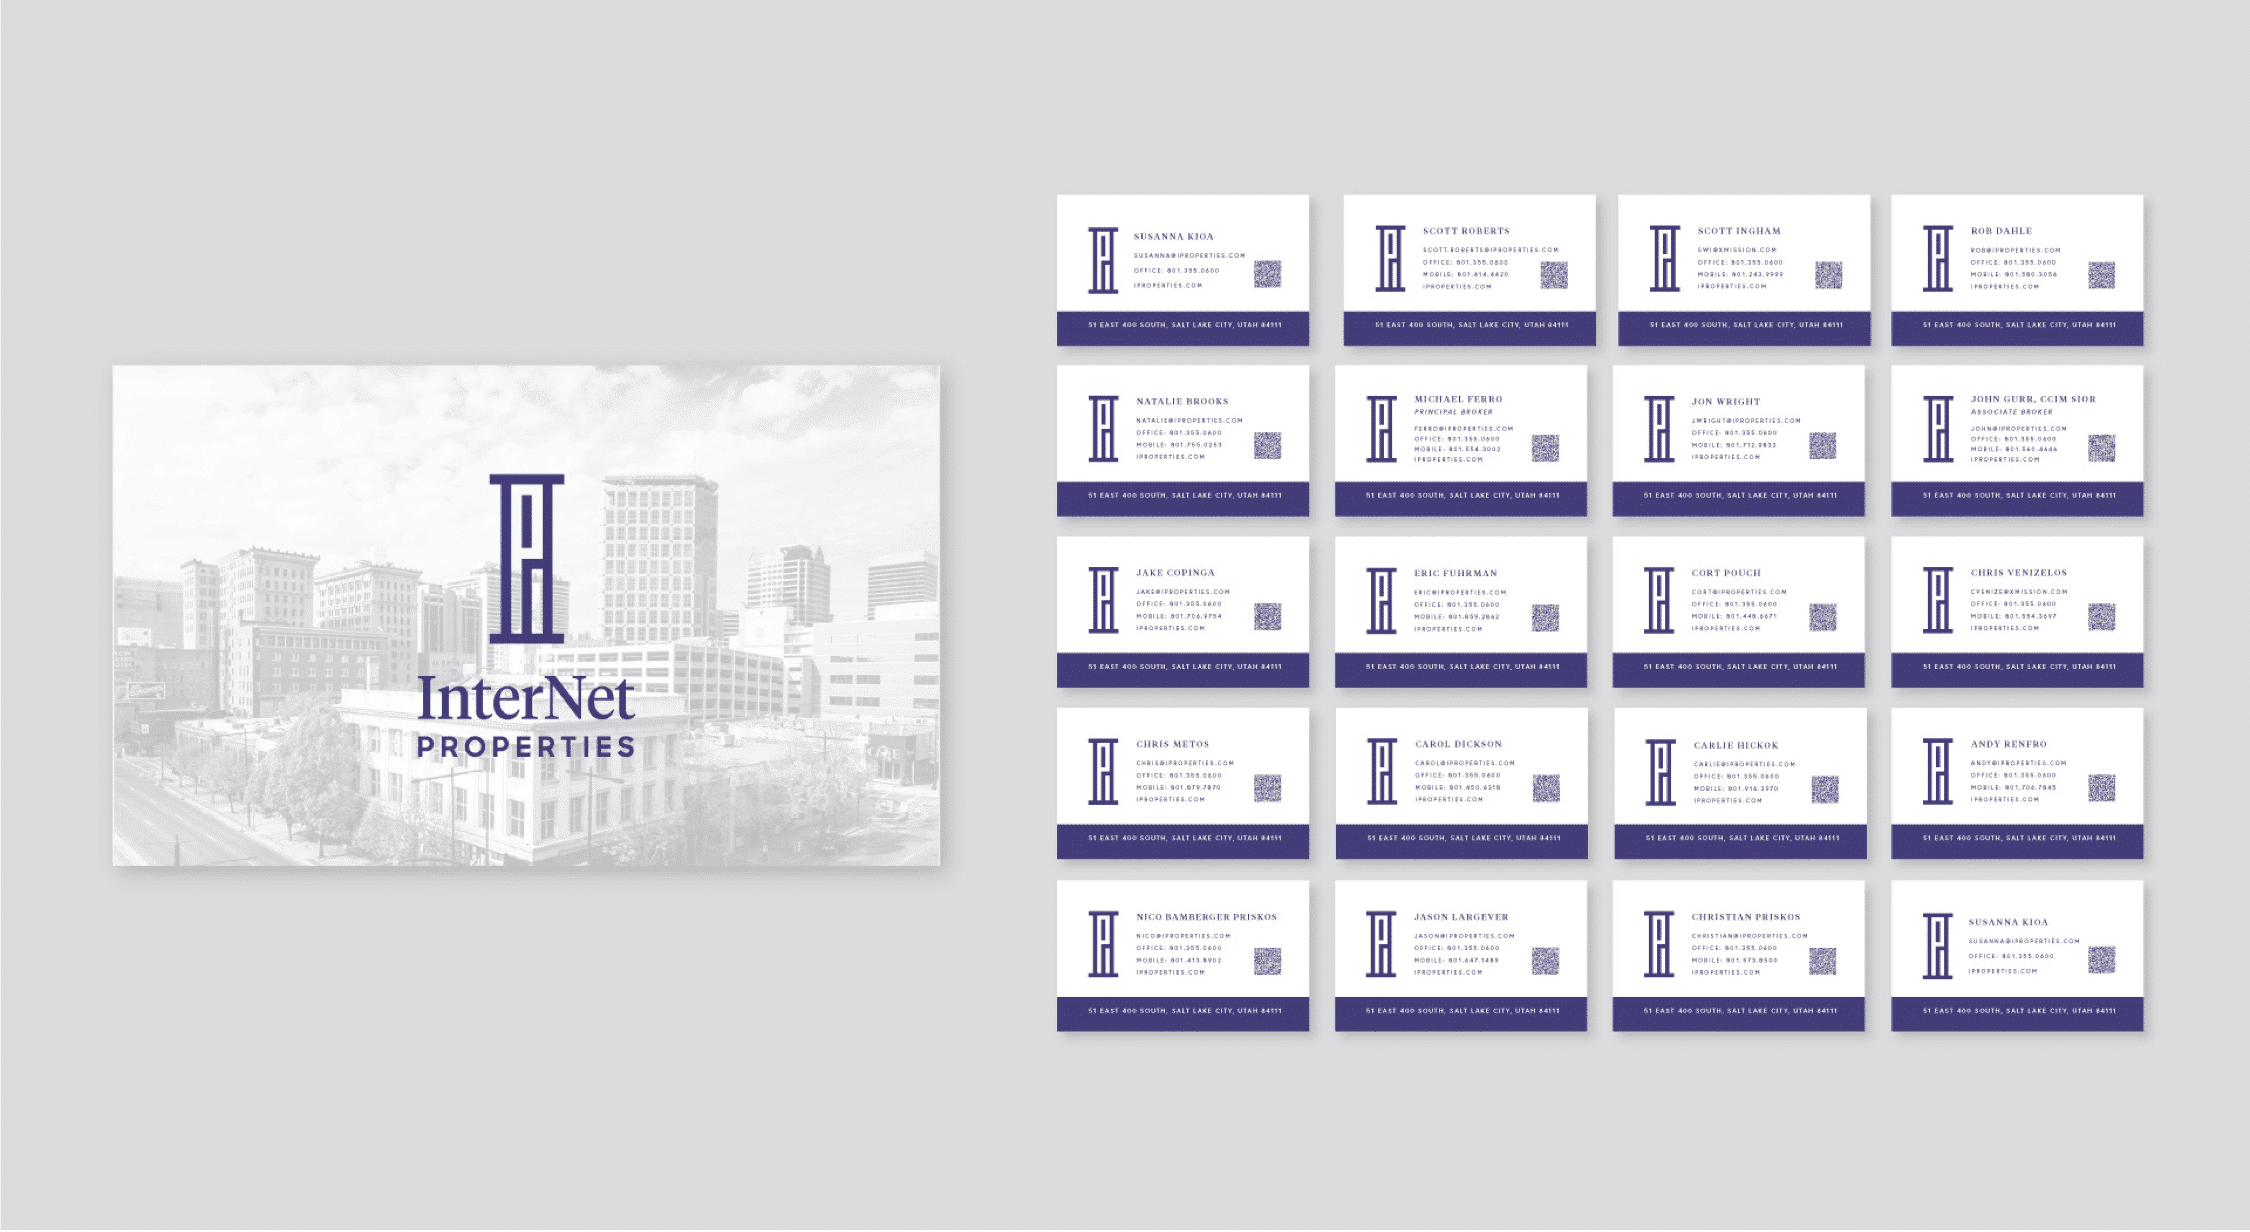 Internet Properties business cards with branding and design by Anchor & Alpine